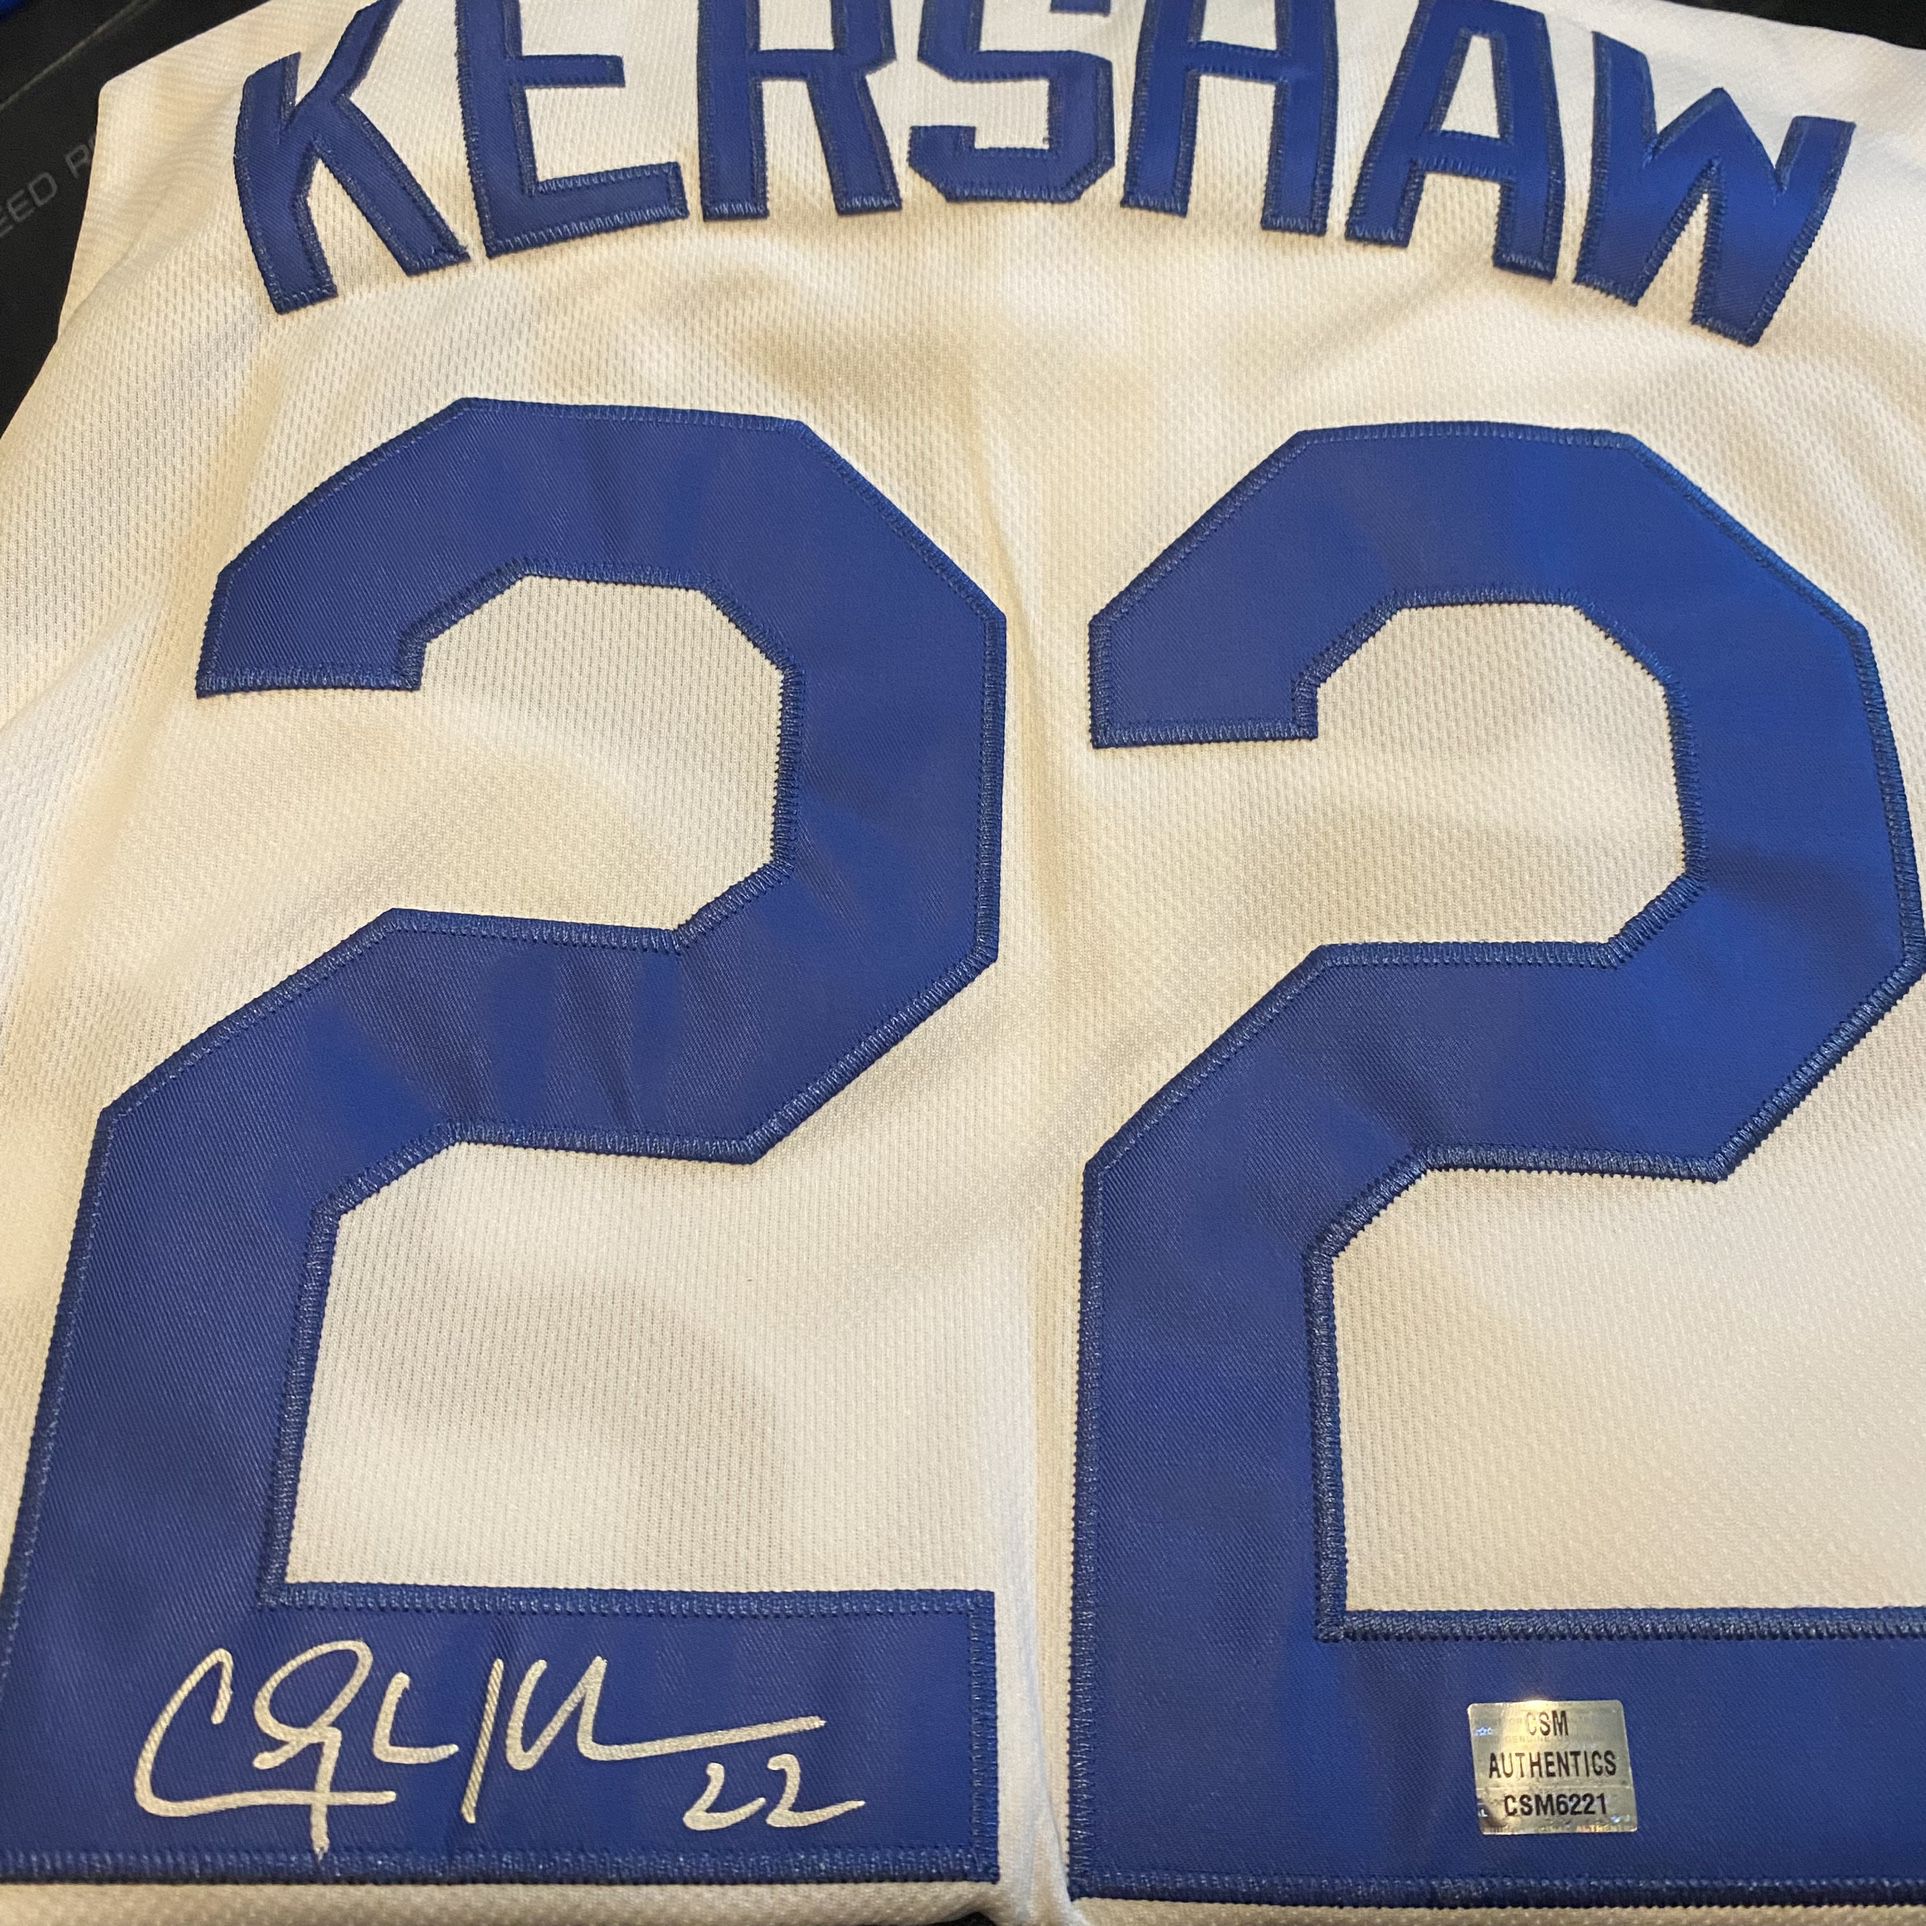 Clayton Kershaw Autograph Jersey Los Angeles Dodgers for Sale in Santa Fe  Springs, CA - OfferUp